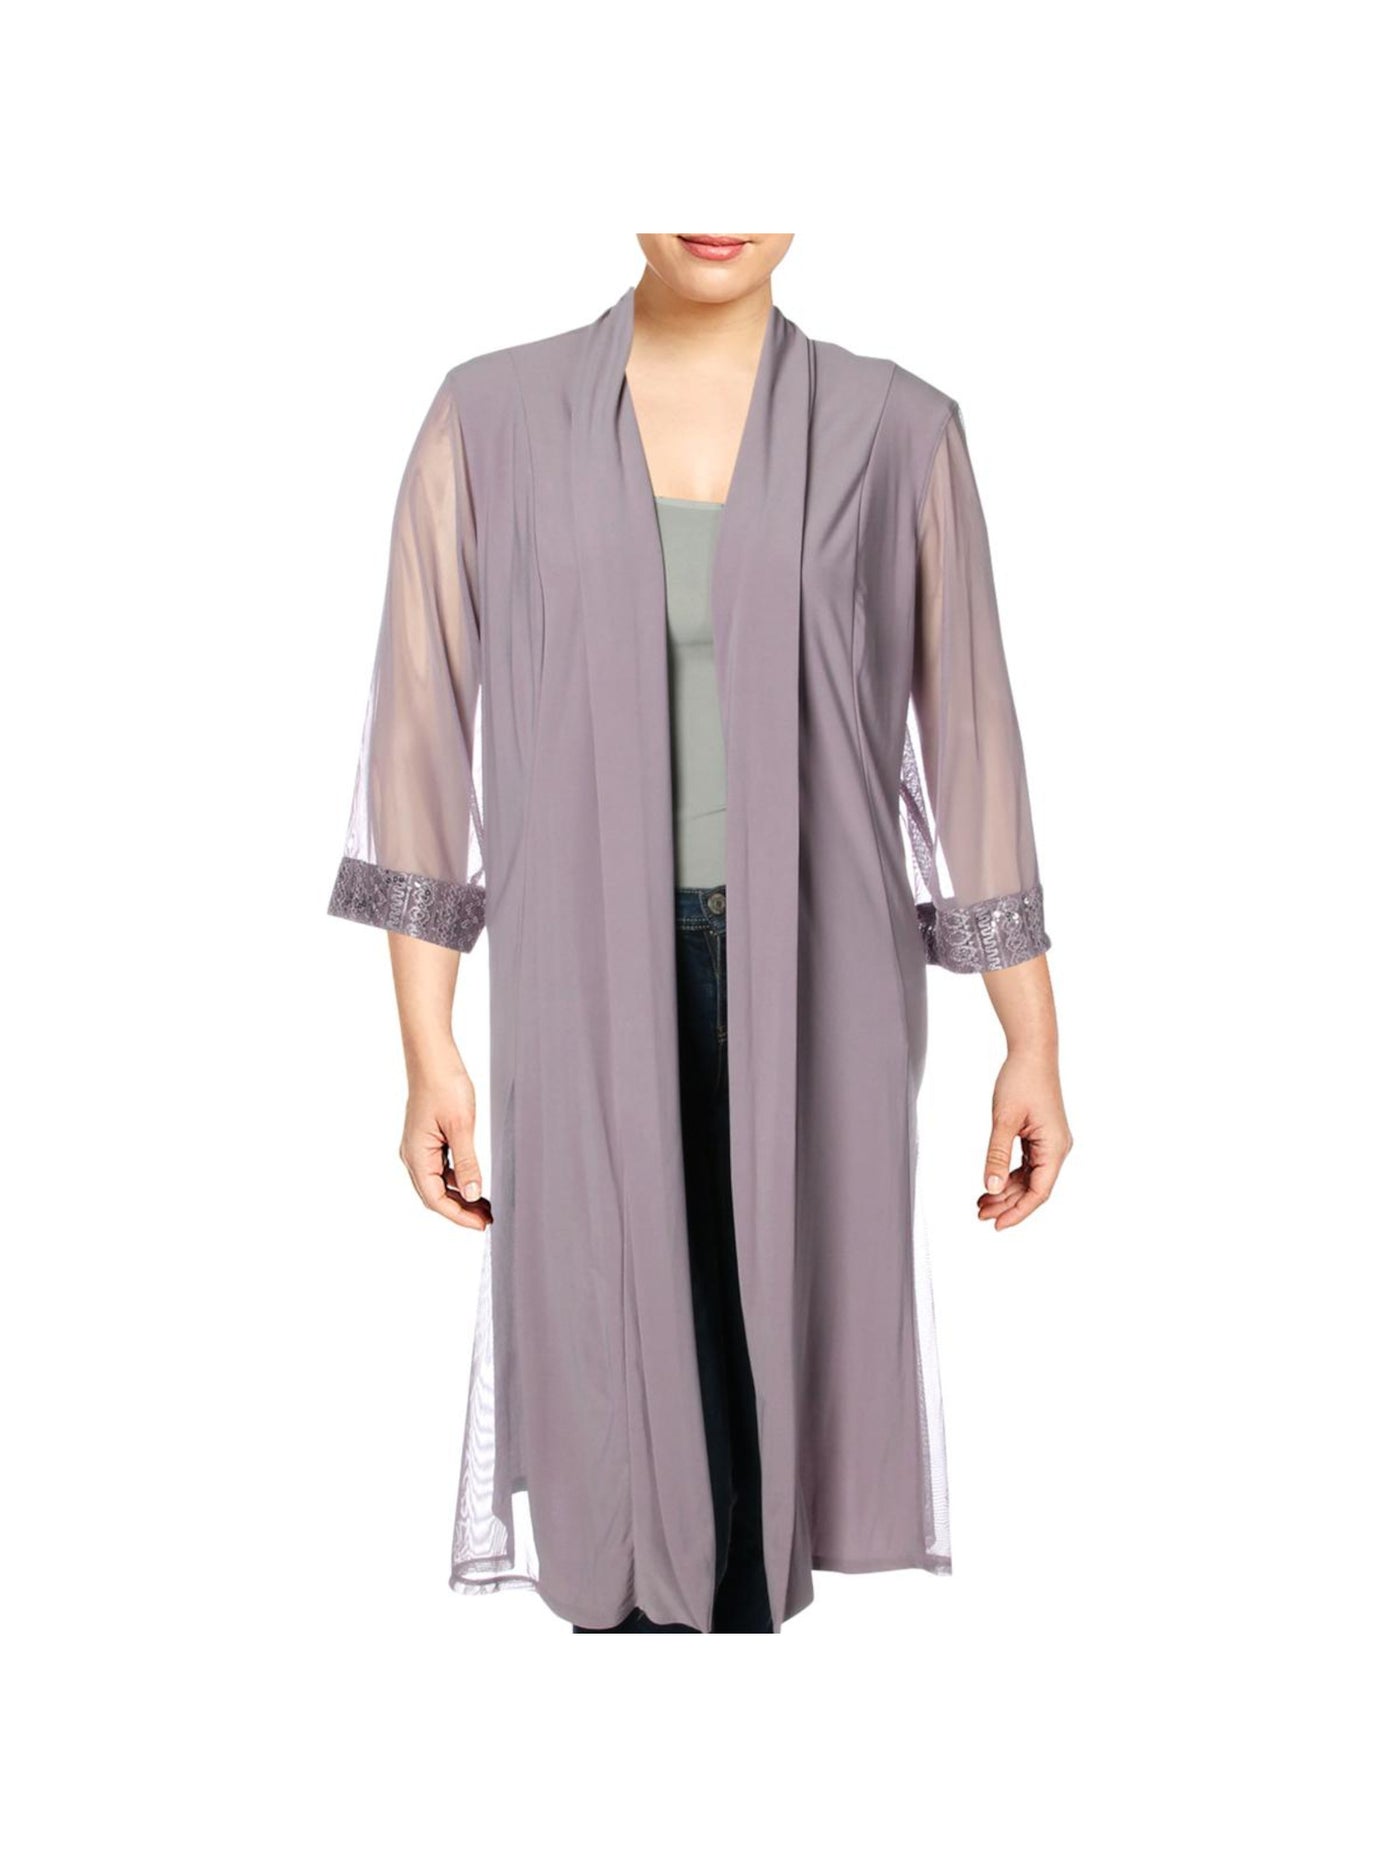 R&M RICHARDS WOMAN Womens Purple Embellished Shawl Collar Illusion Insets 3/4 Sleeve Open Front Wear To Work Duster Cardigan Plus 14W